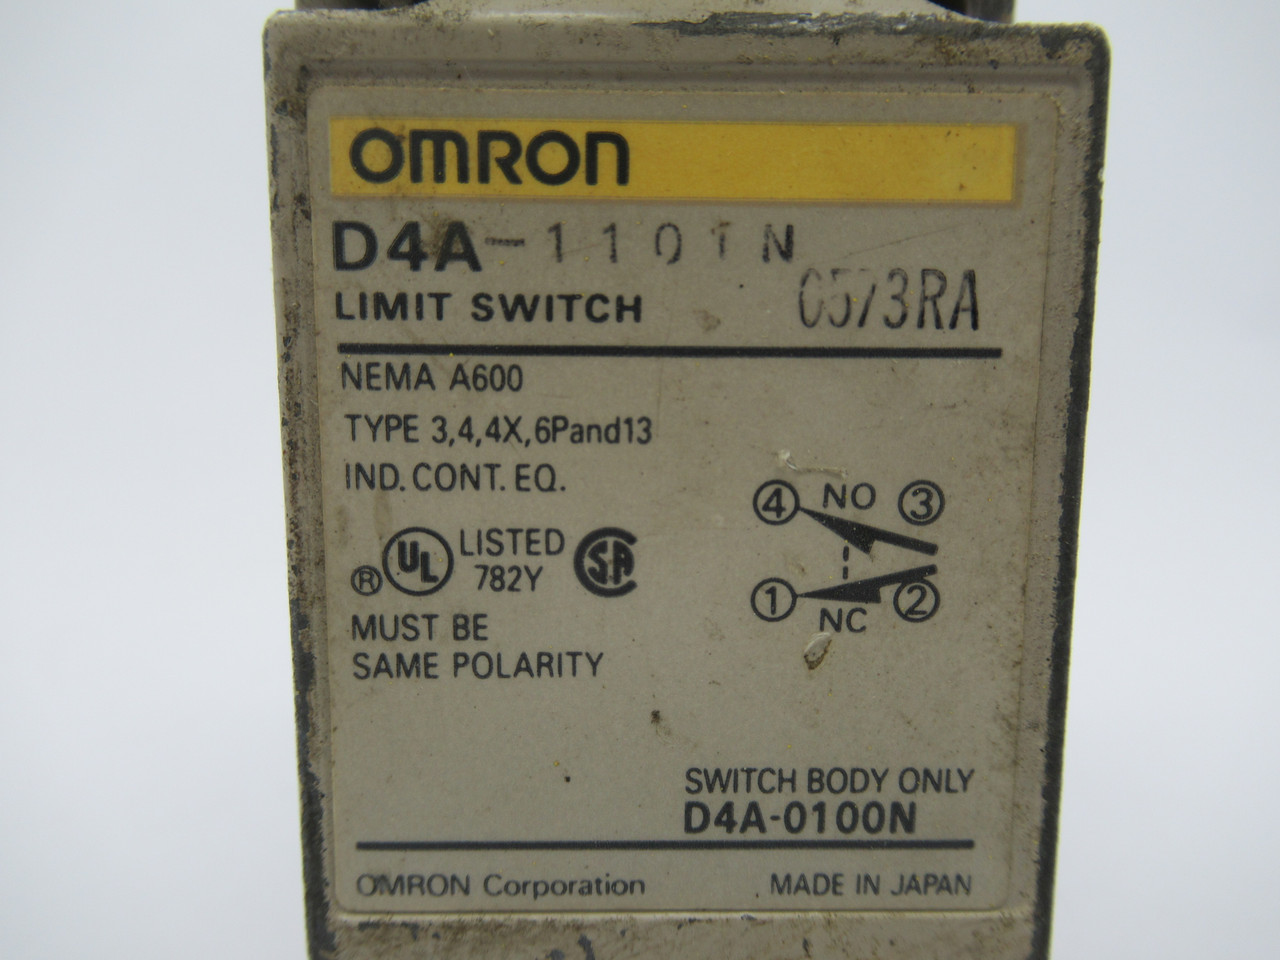 Omron D4A-1101N Limit Switch Type 3,4,4X,6P and 13 USED